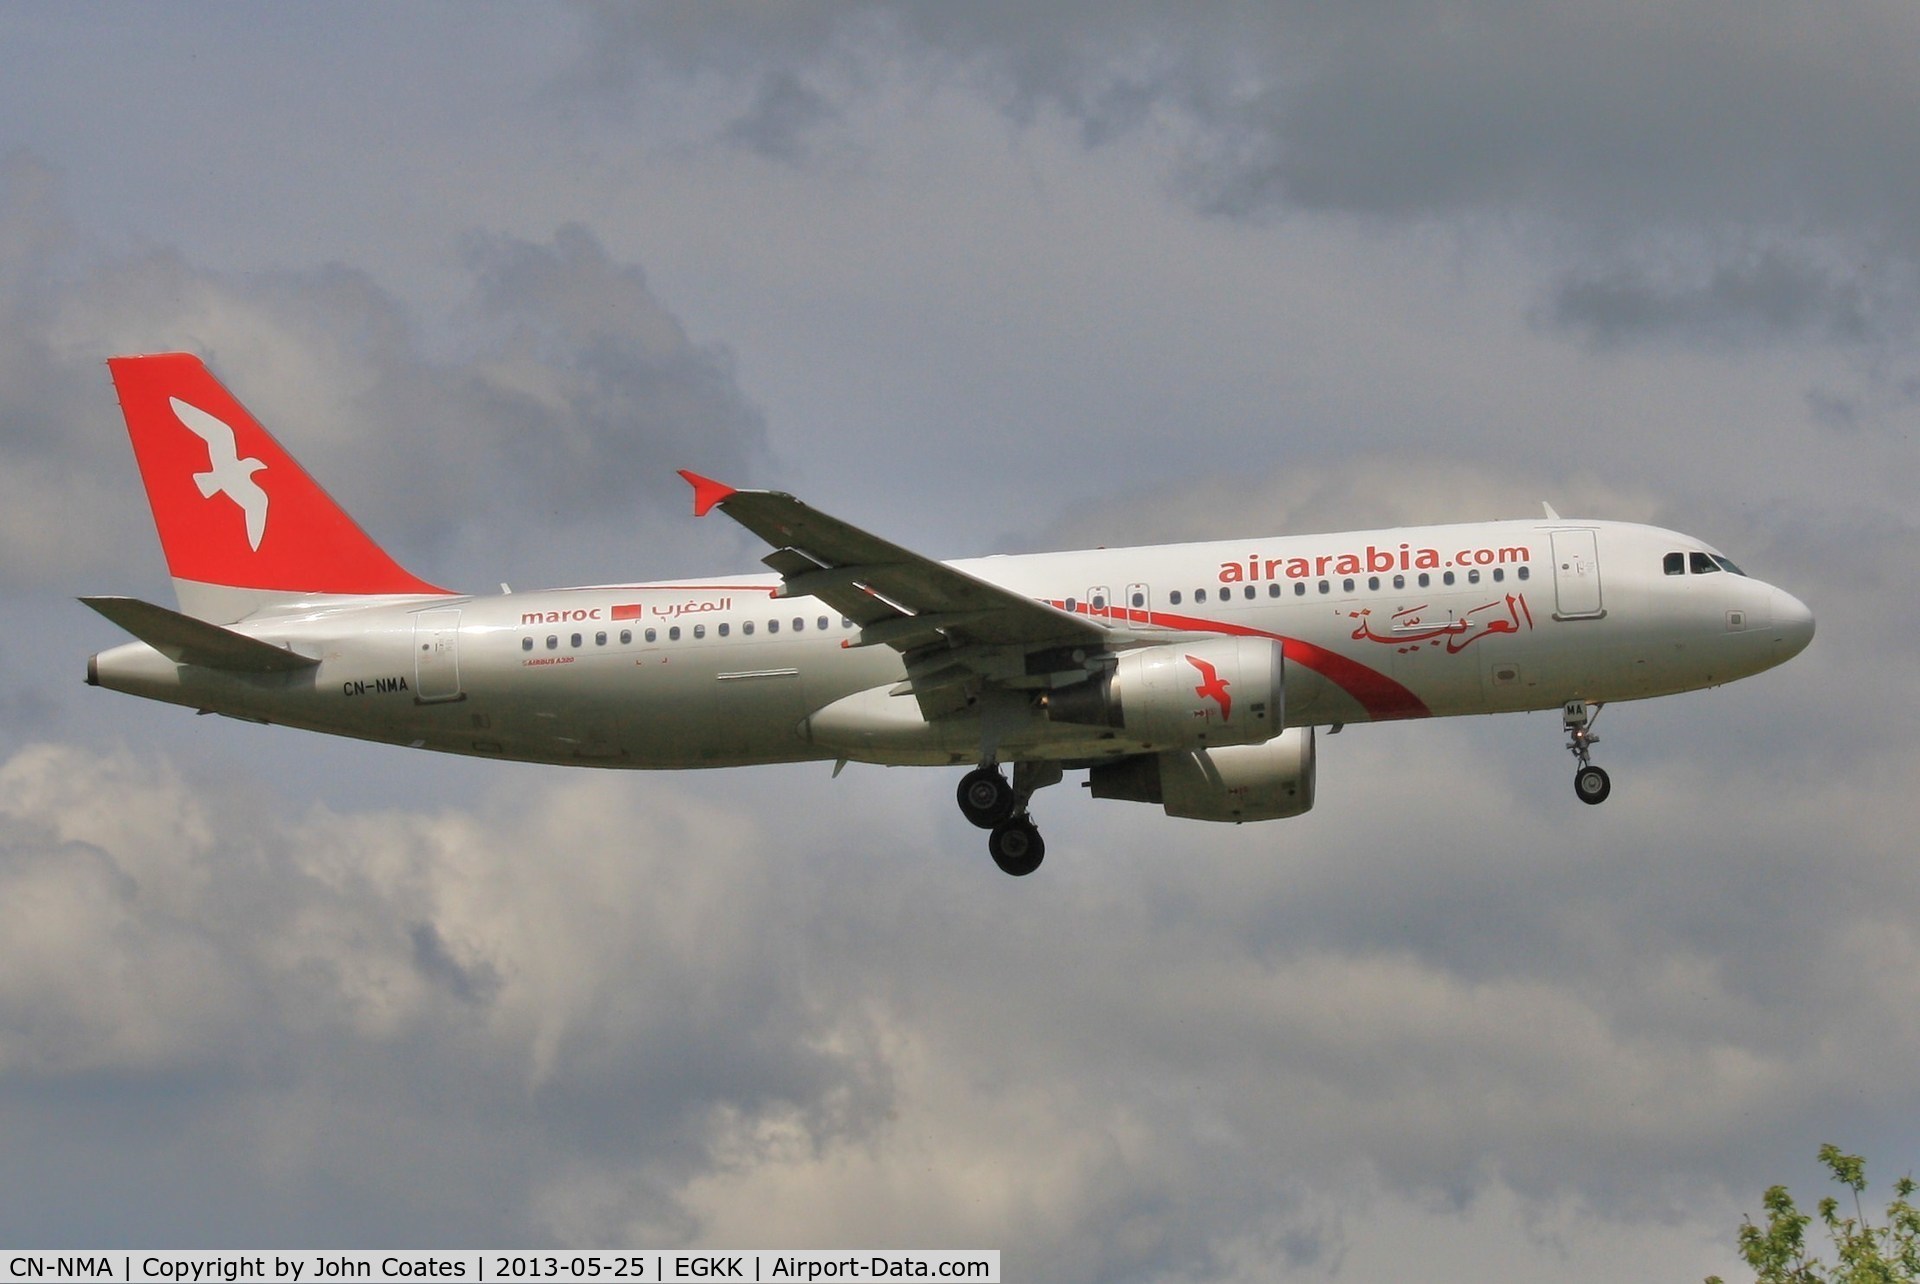 CN-NMA, 2009 Airbus A320-214 C/N 3809, Finals to 08R